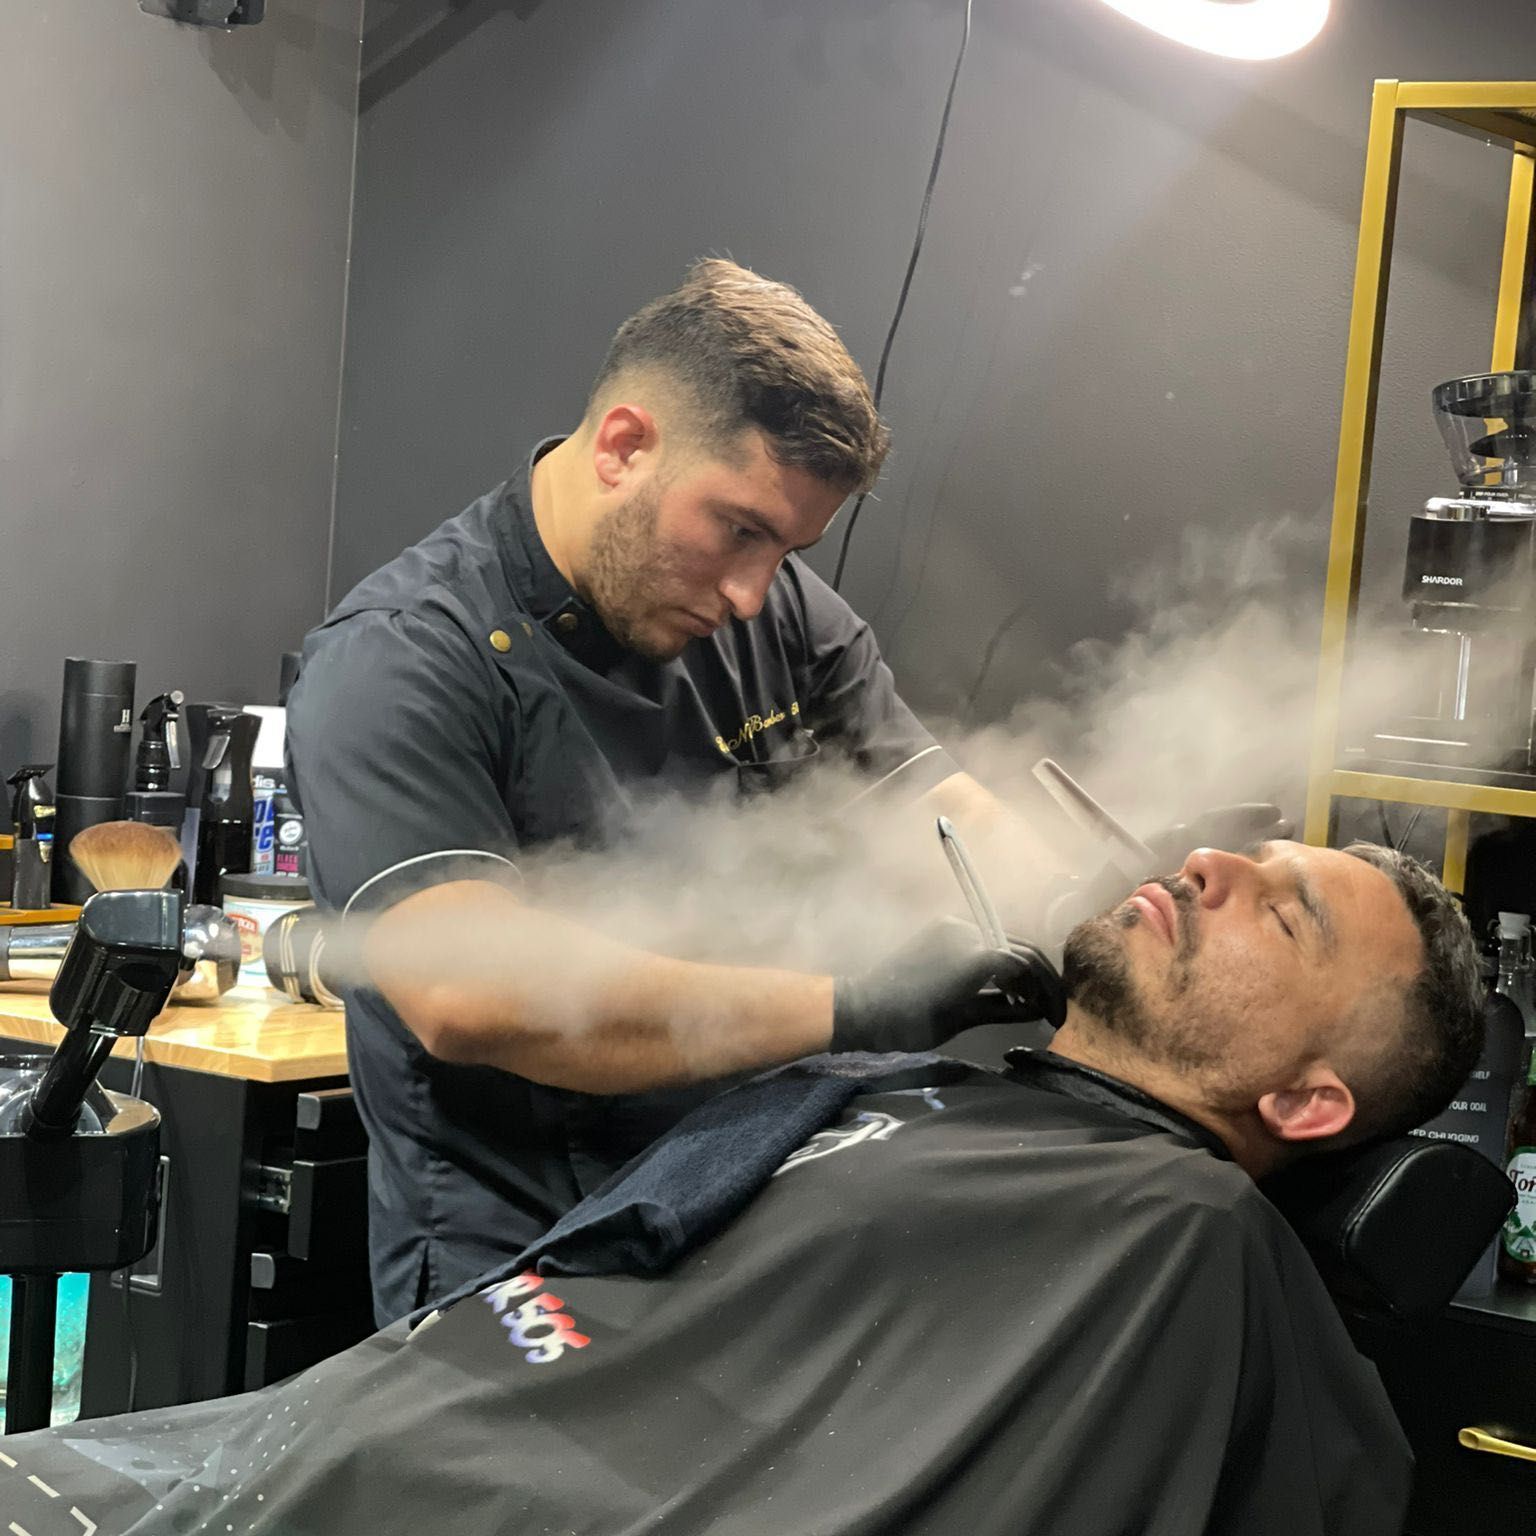 The N1c4 Hot towel shave Experience portfolio